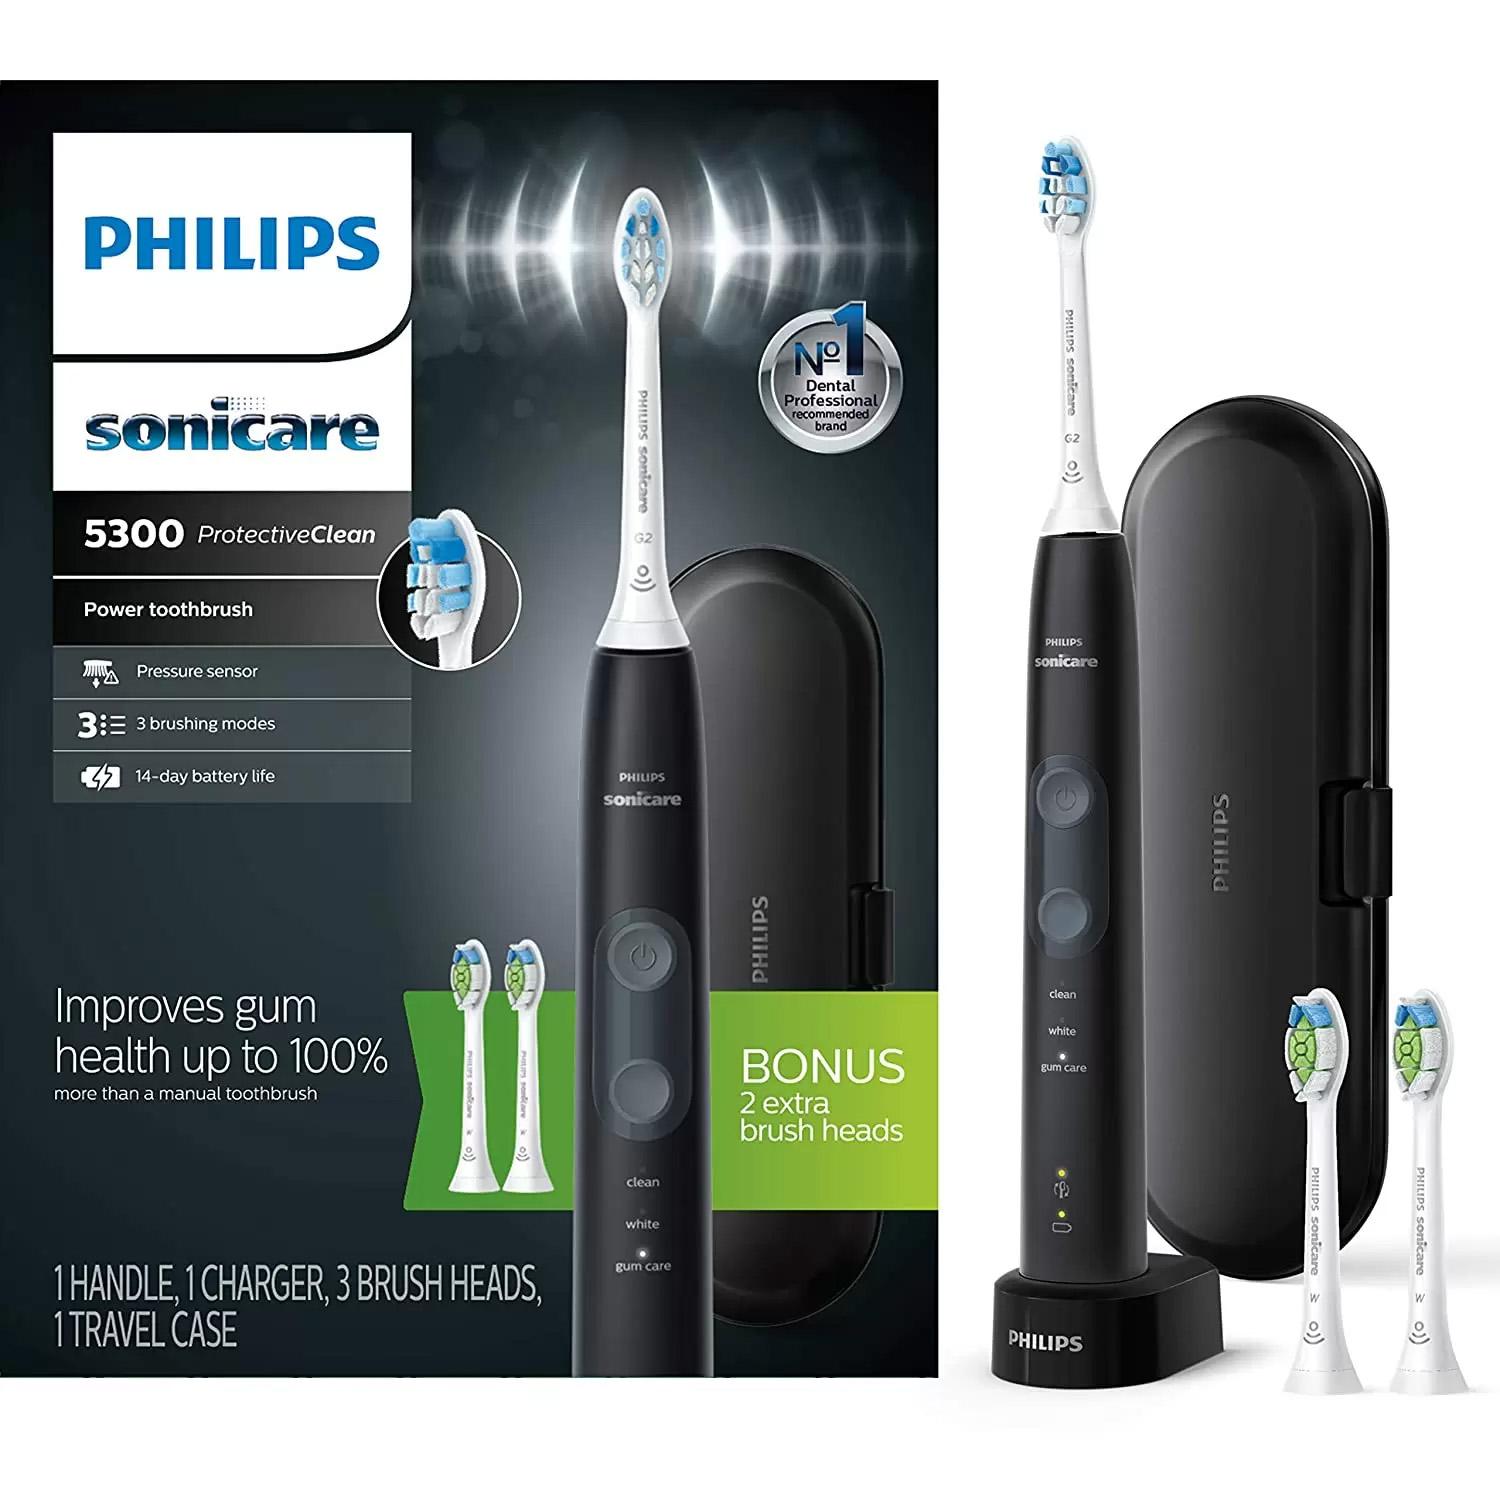 Philips Sonicare HX6423 ProtectiveClean 5300 Electric Toothbrush for $49.95 Shipped